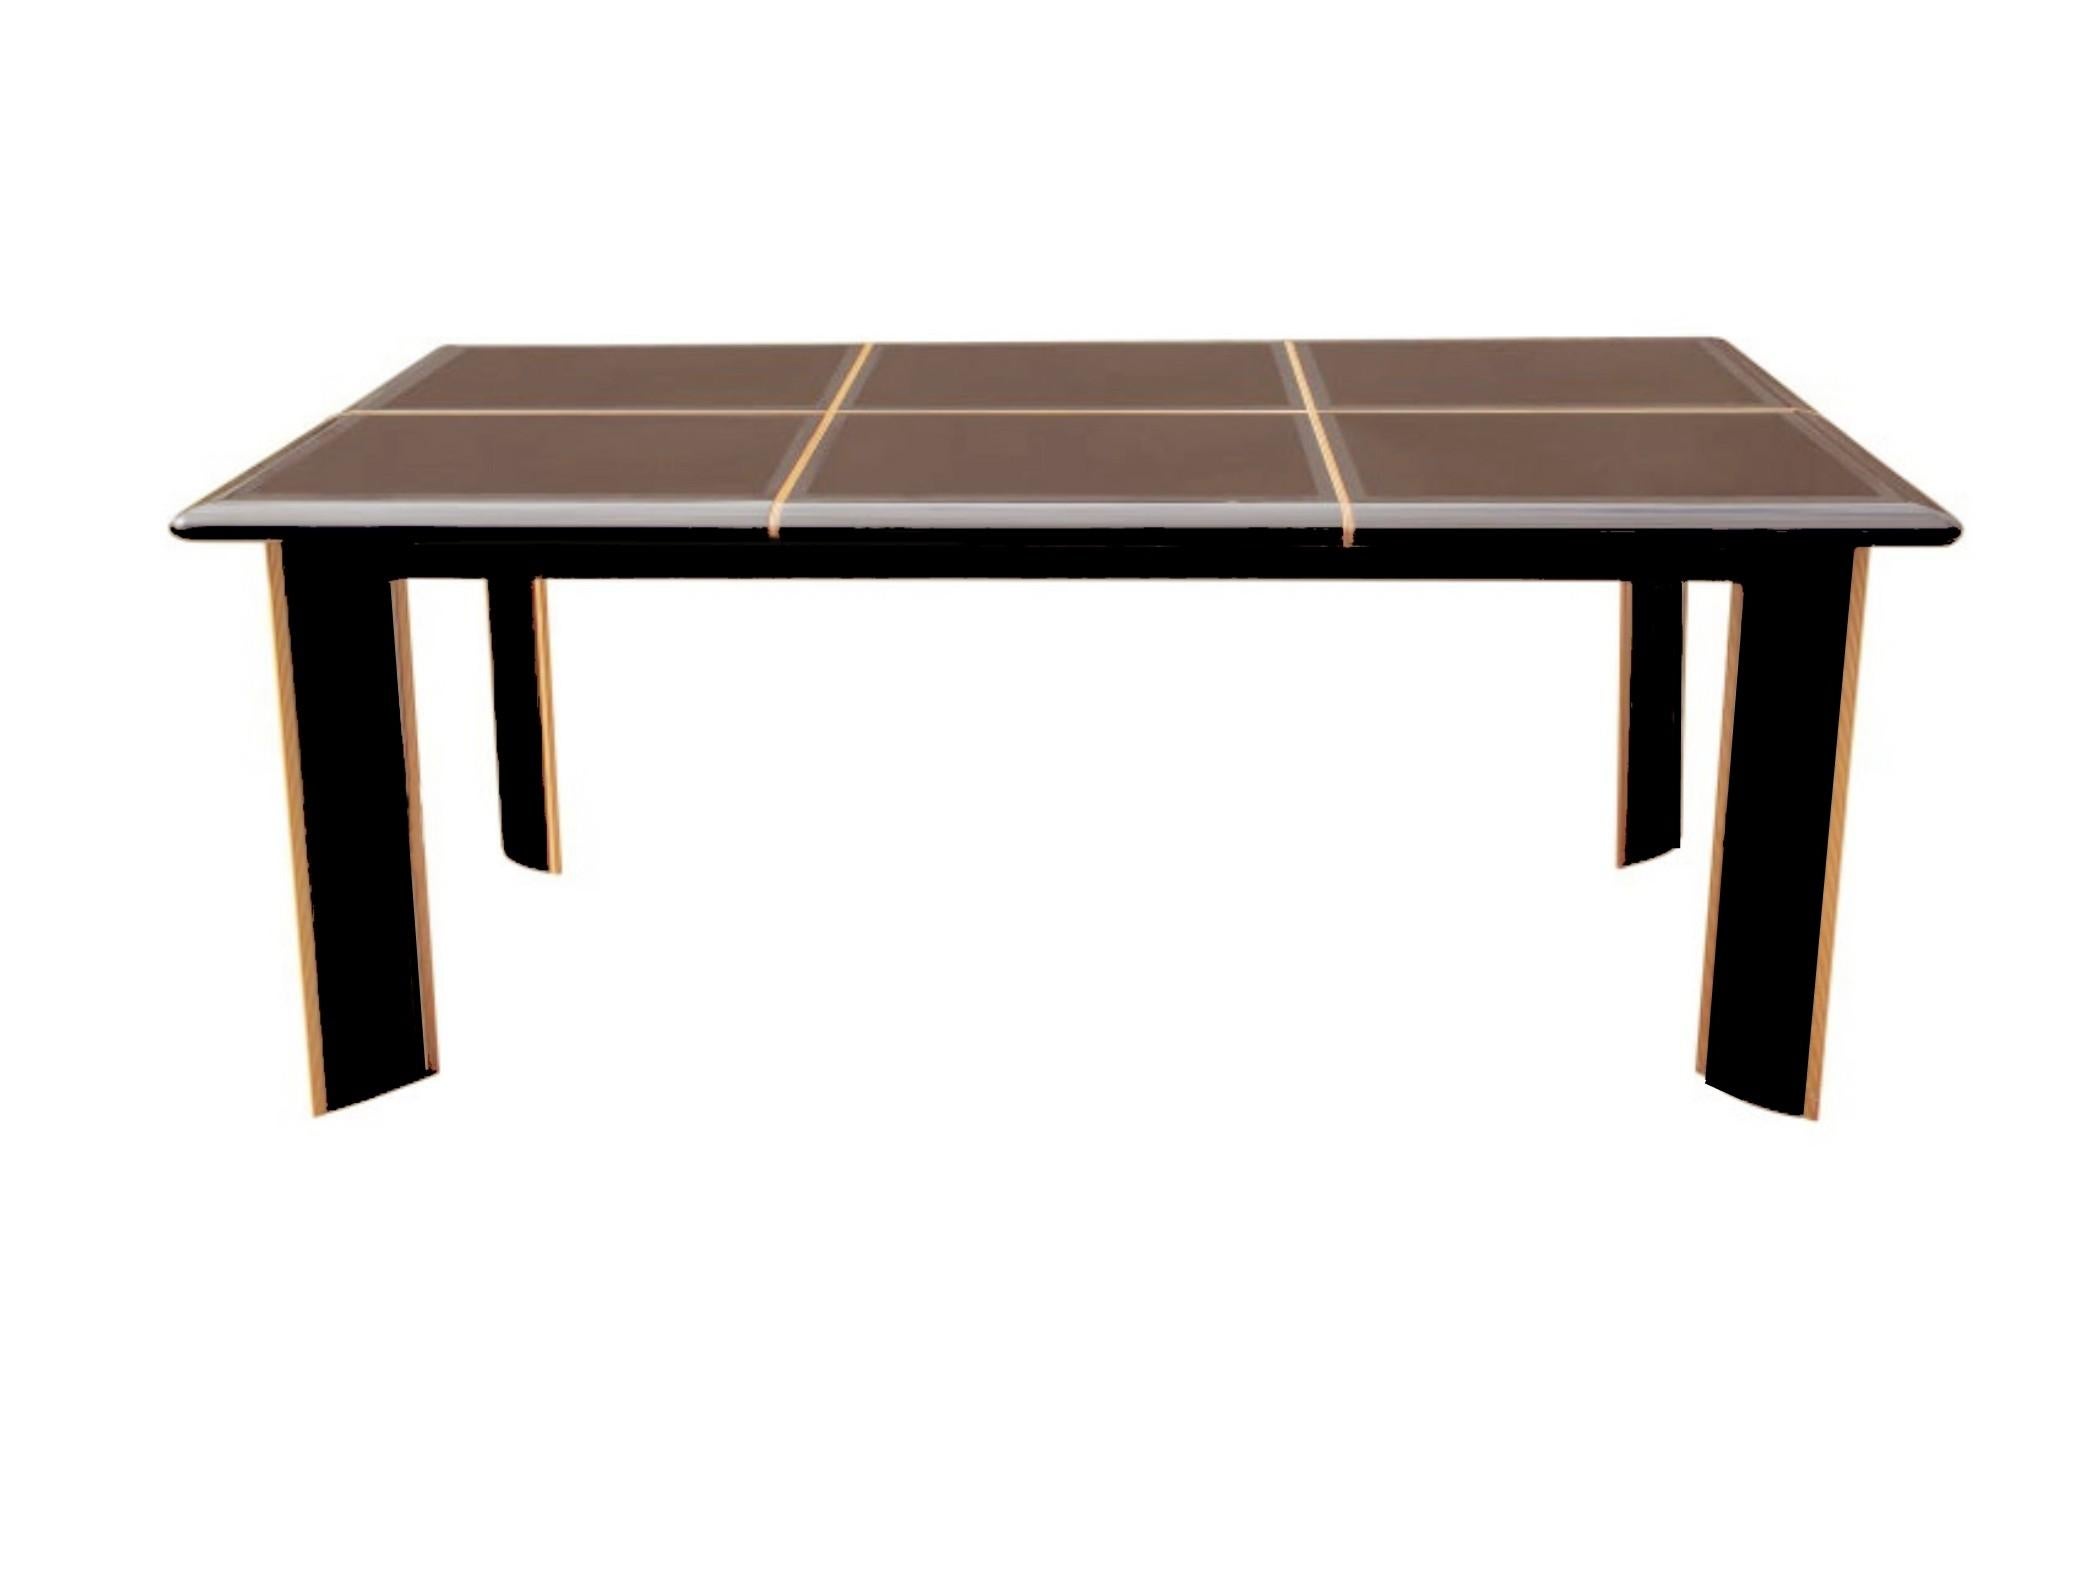 Roche Bobois for Pierre Cardin Italian high gloss black lacquer dining table with beveled glass inserts on top. It has one leaf 23.62